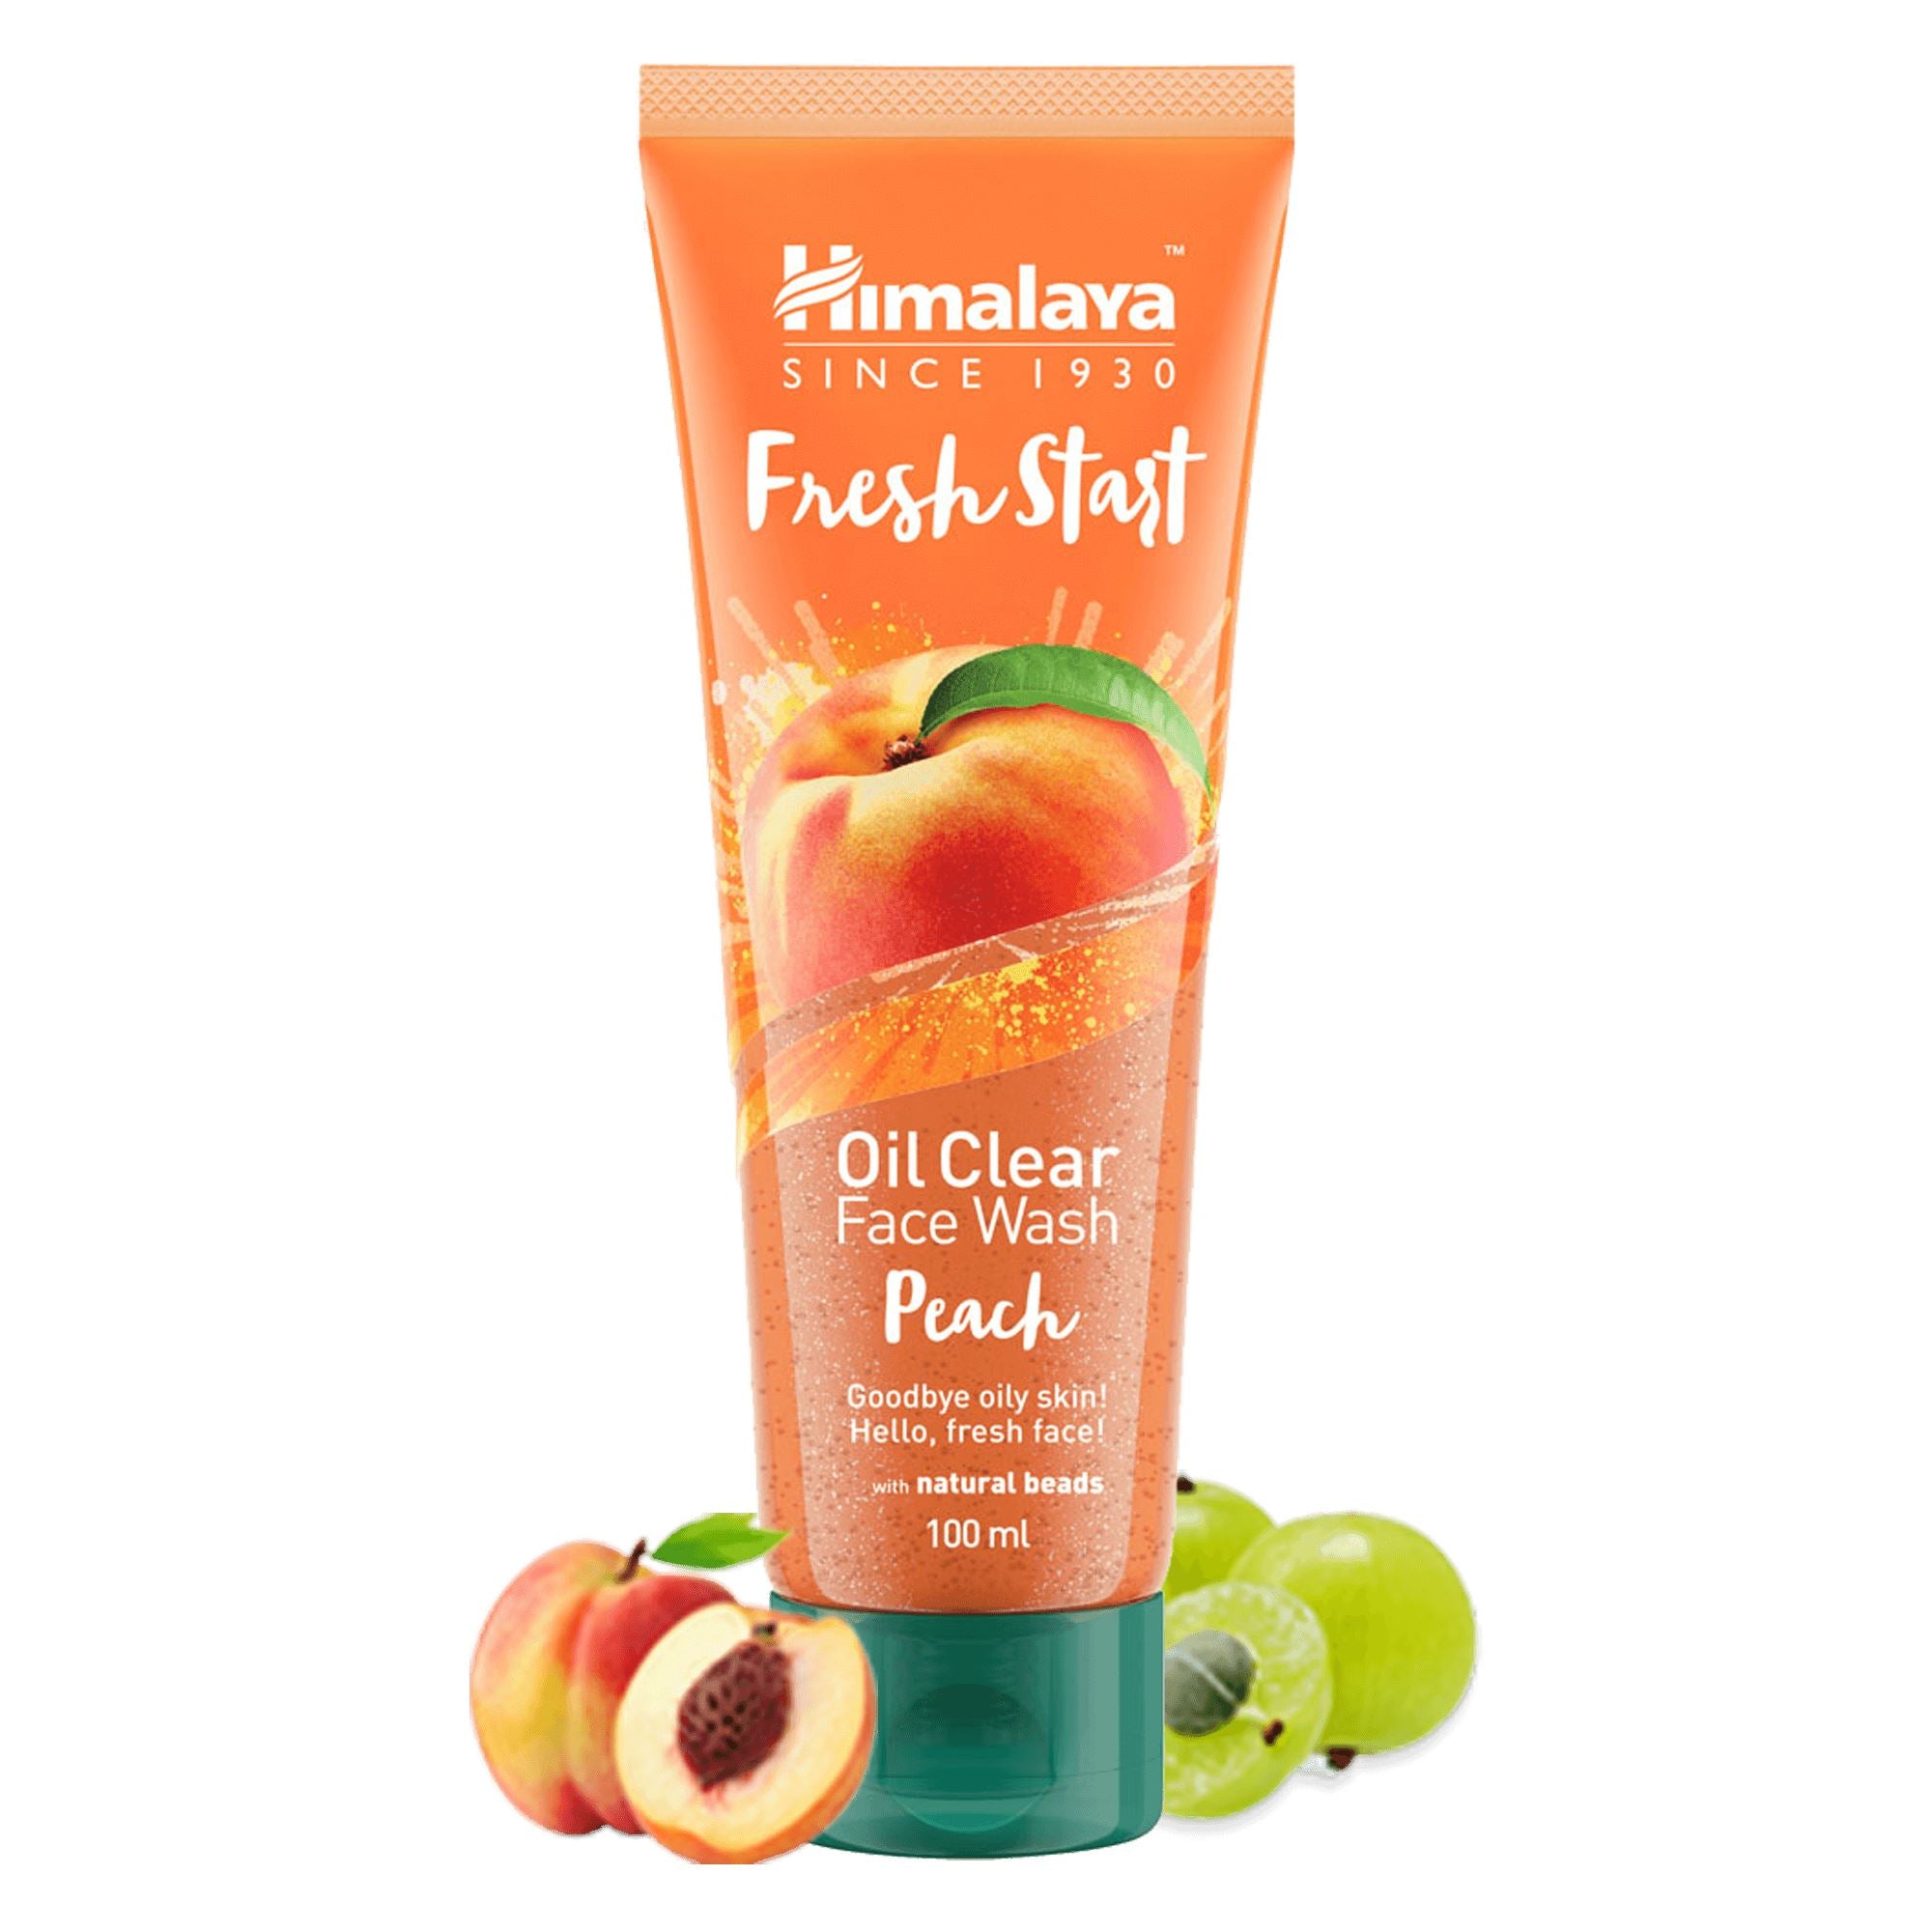 Himalaya Fresh Start Oil Clear Peach Face Wash - Helps remove excess oil, dirt, and impurities